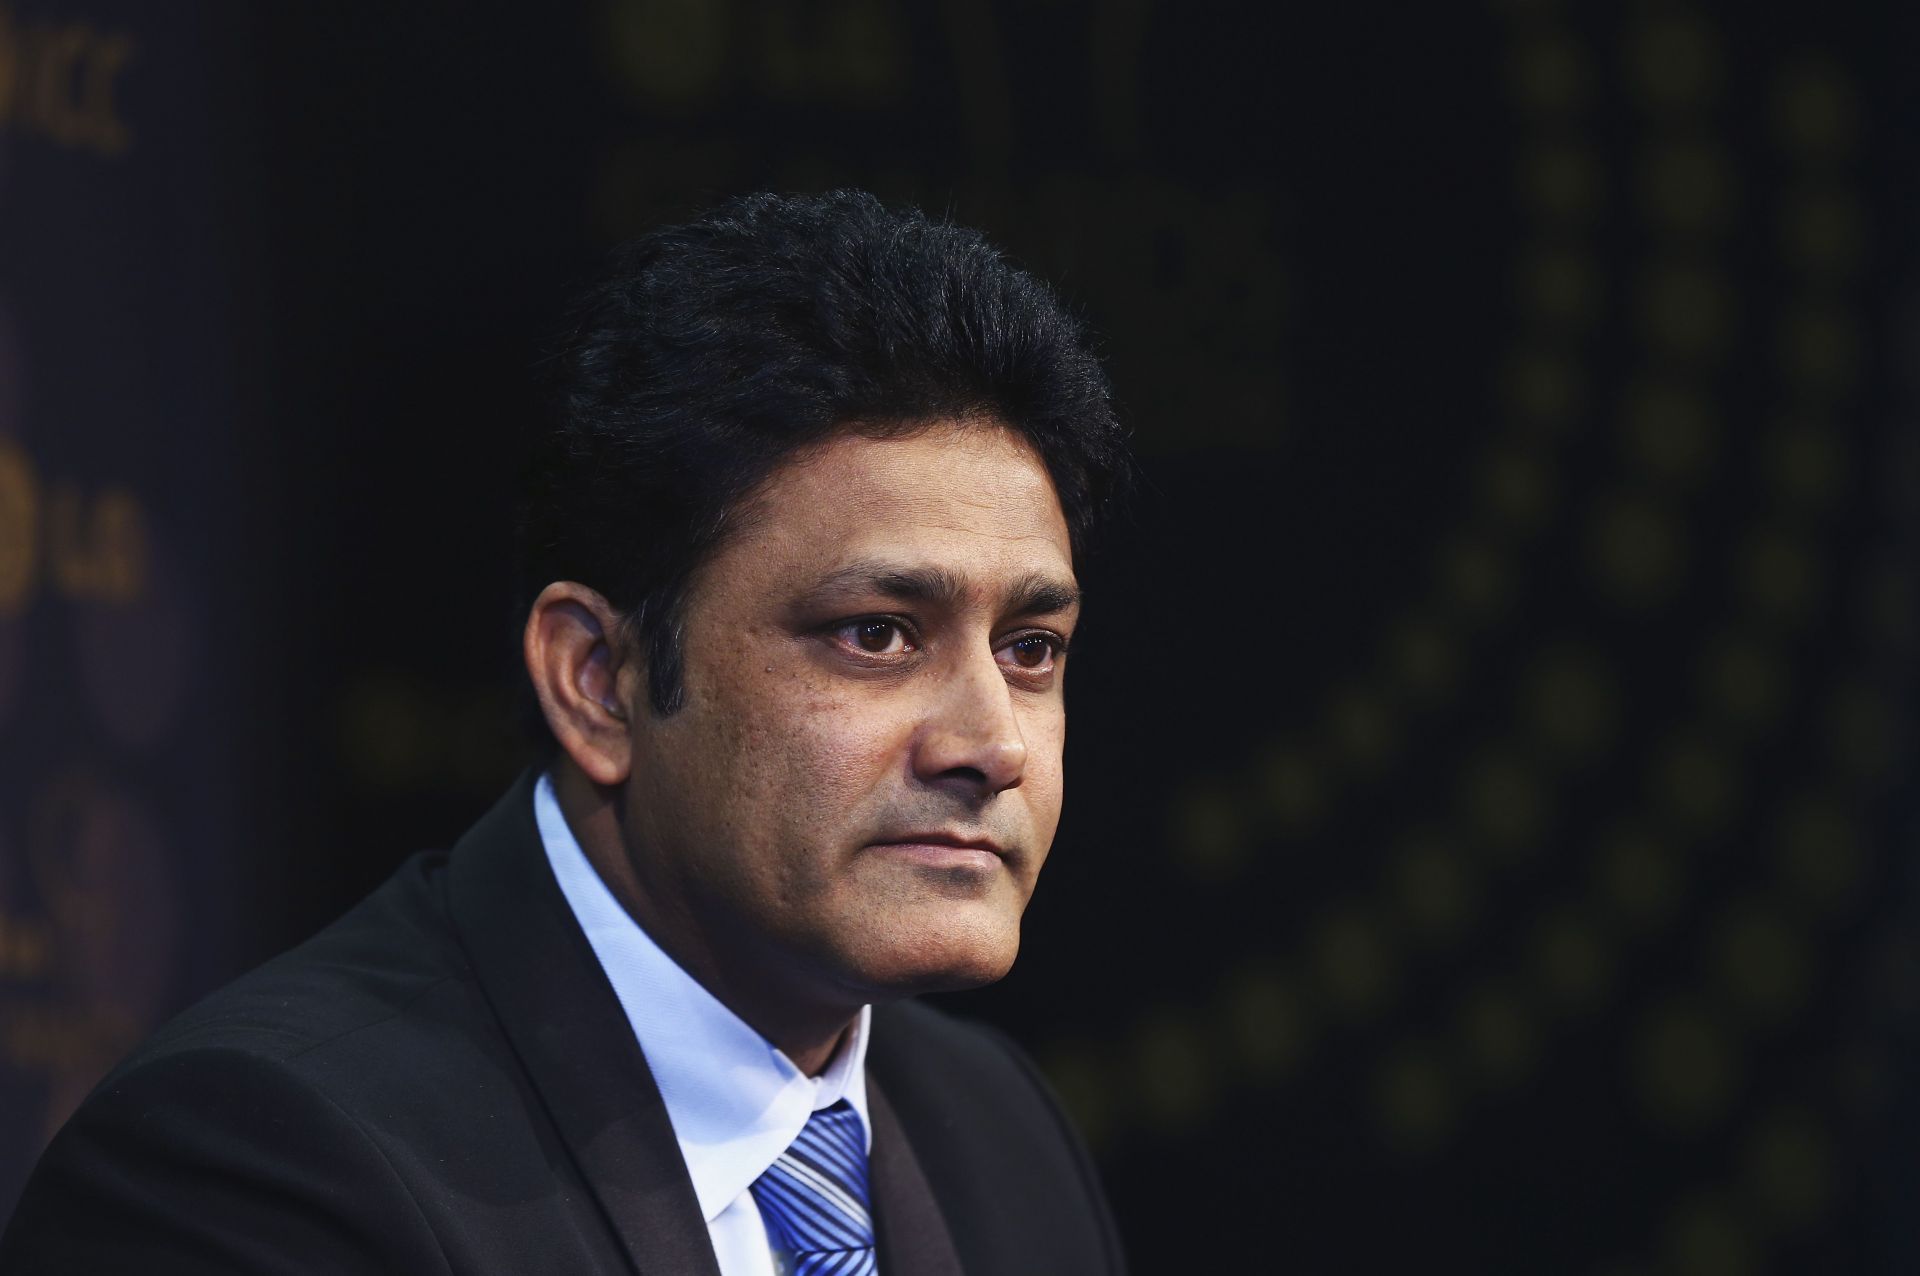 No Indian has more ODI wickets than Kumble